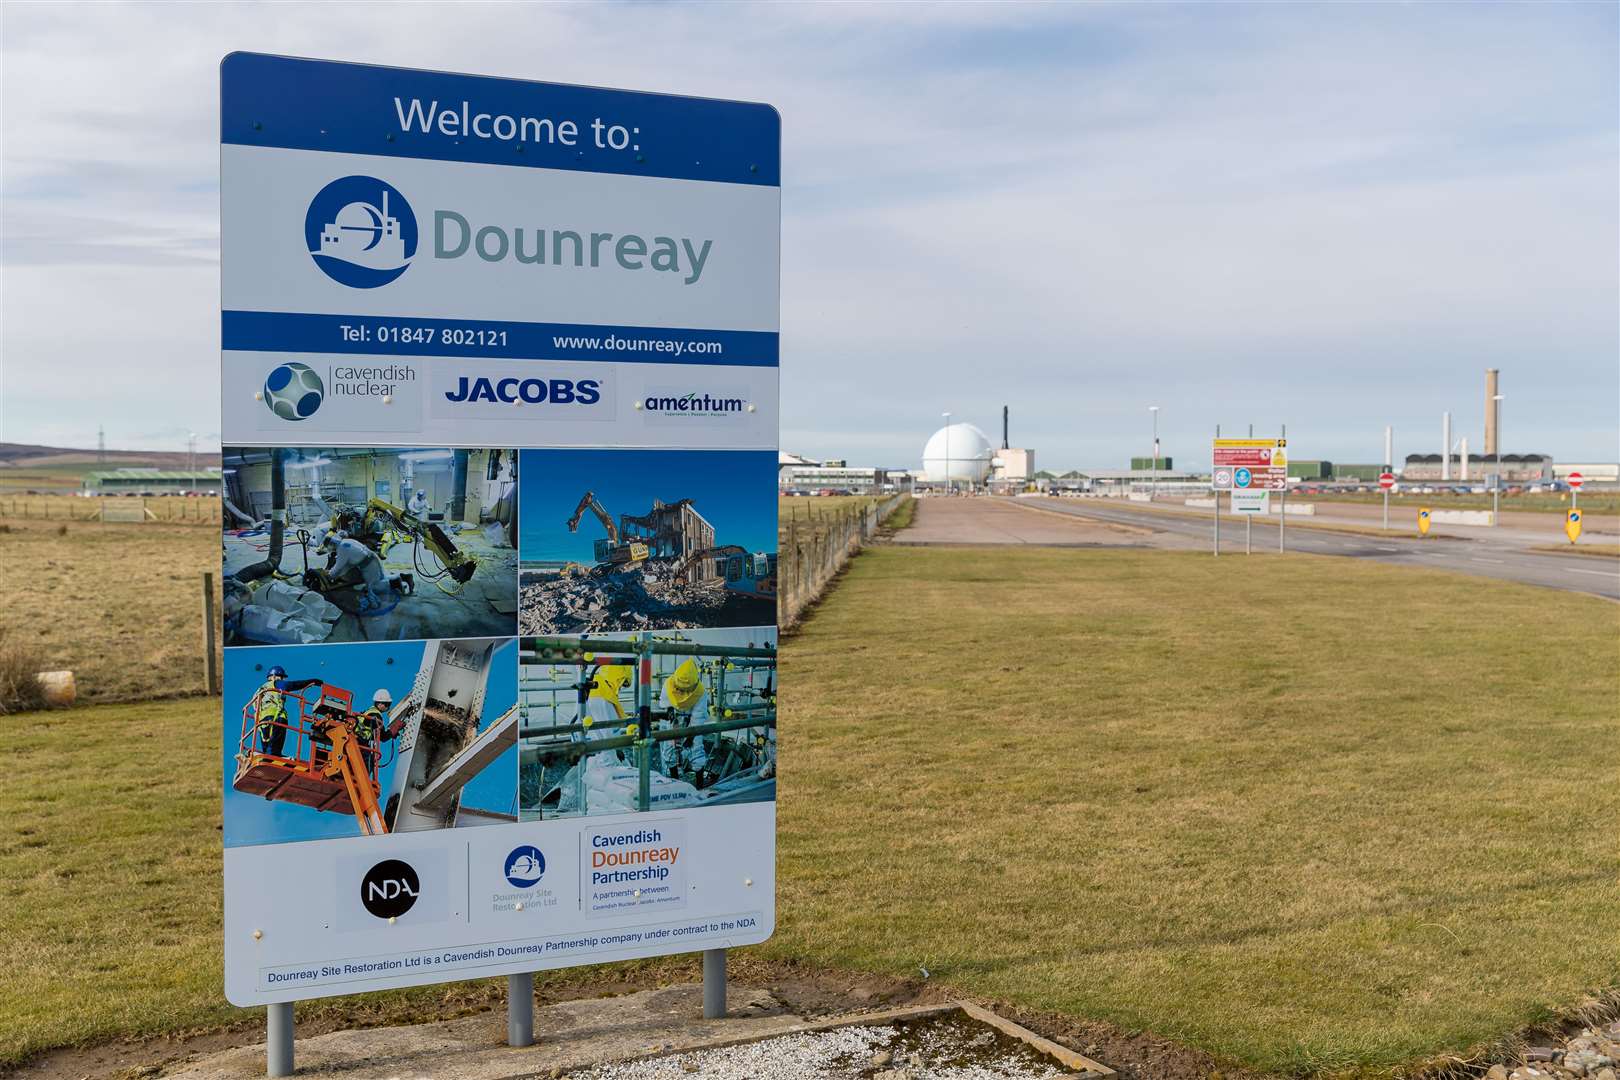 In a message to staff, Dounreay underlined its commitment to supporting the community. Picture: DSRL / NDA